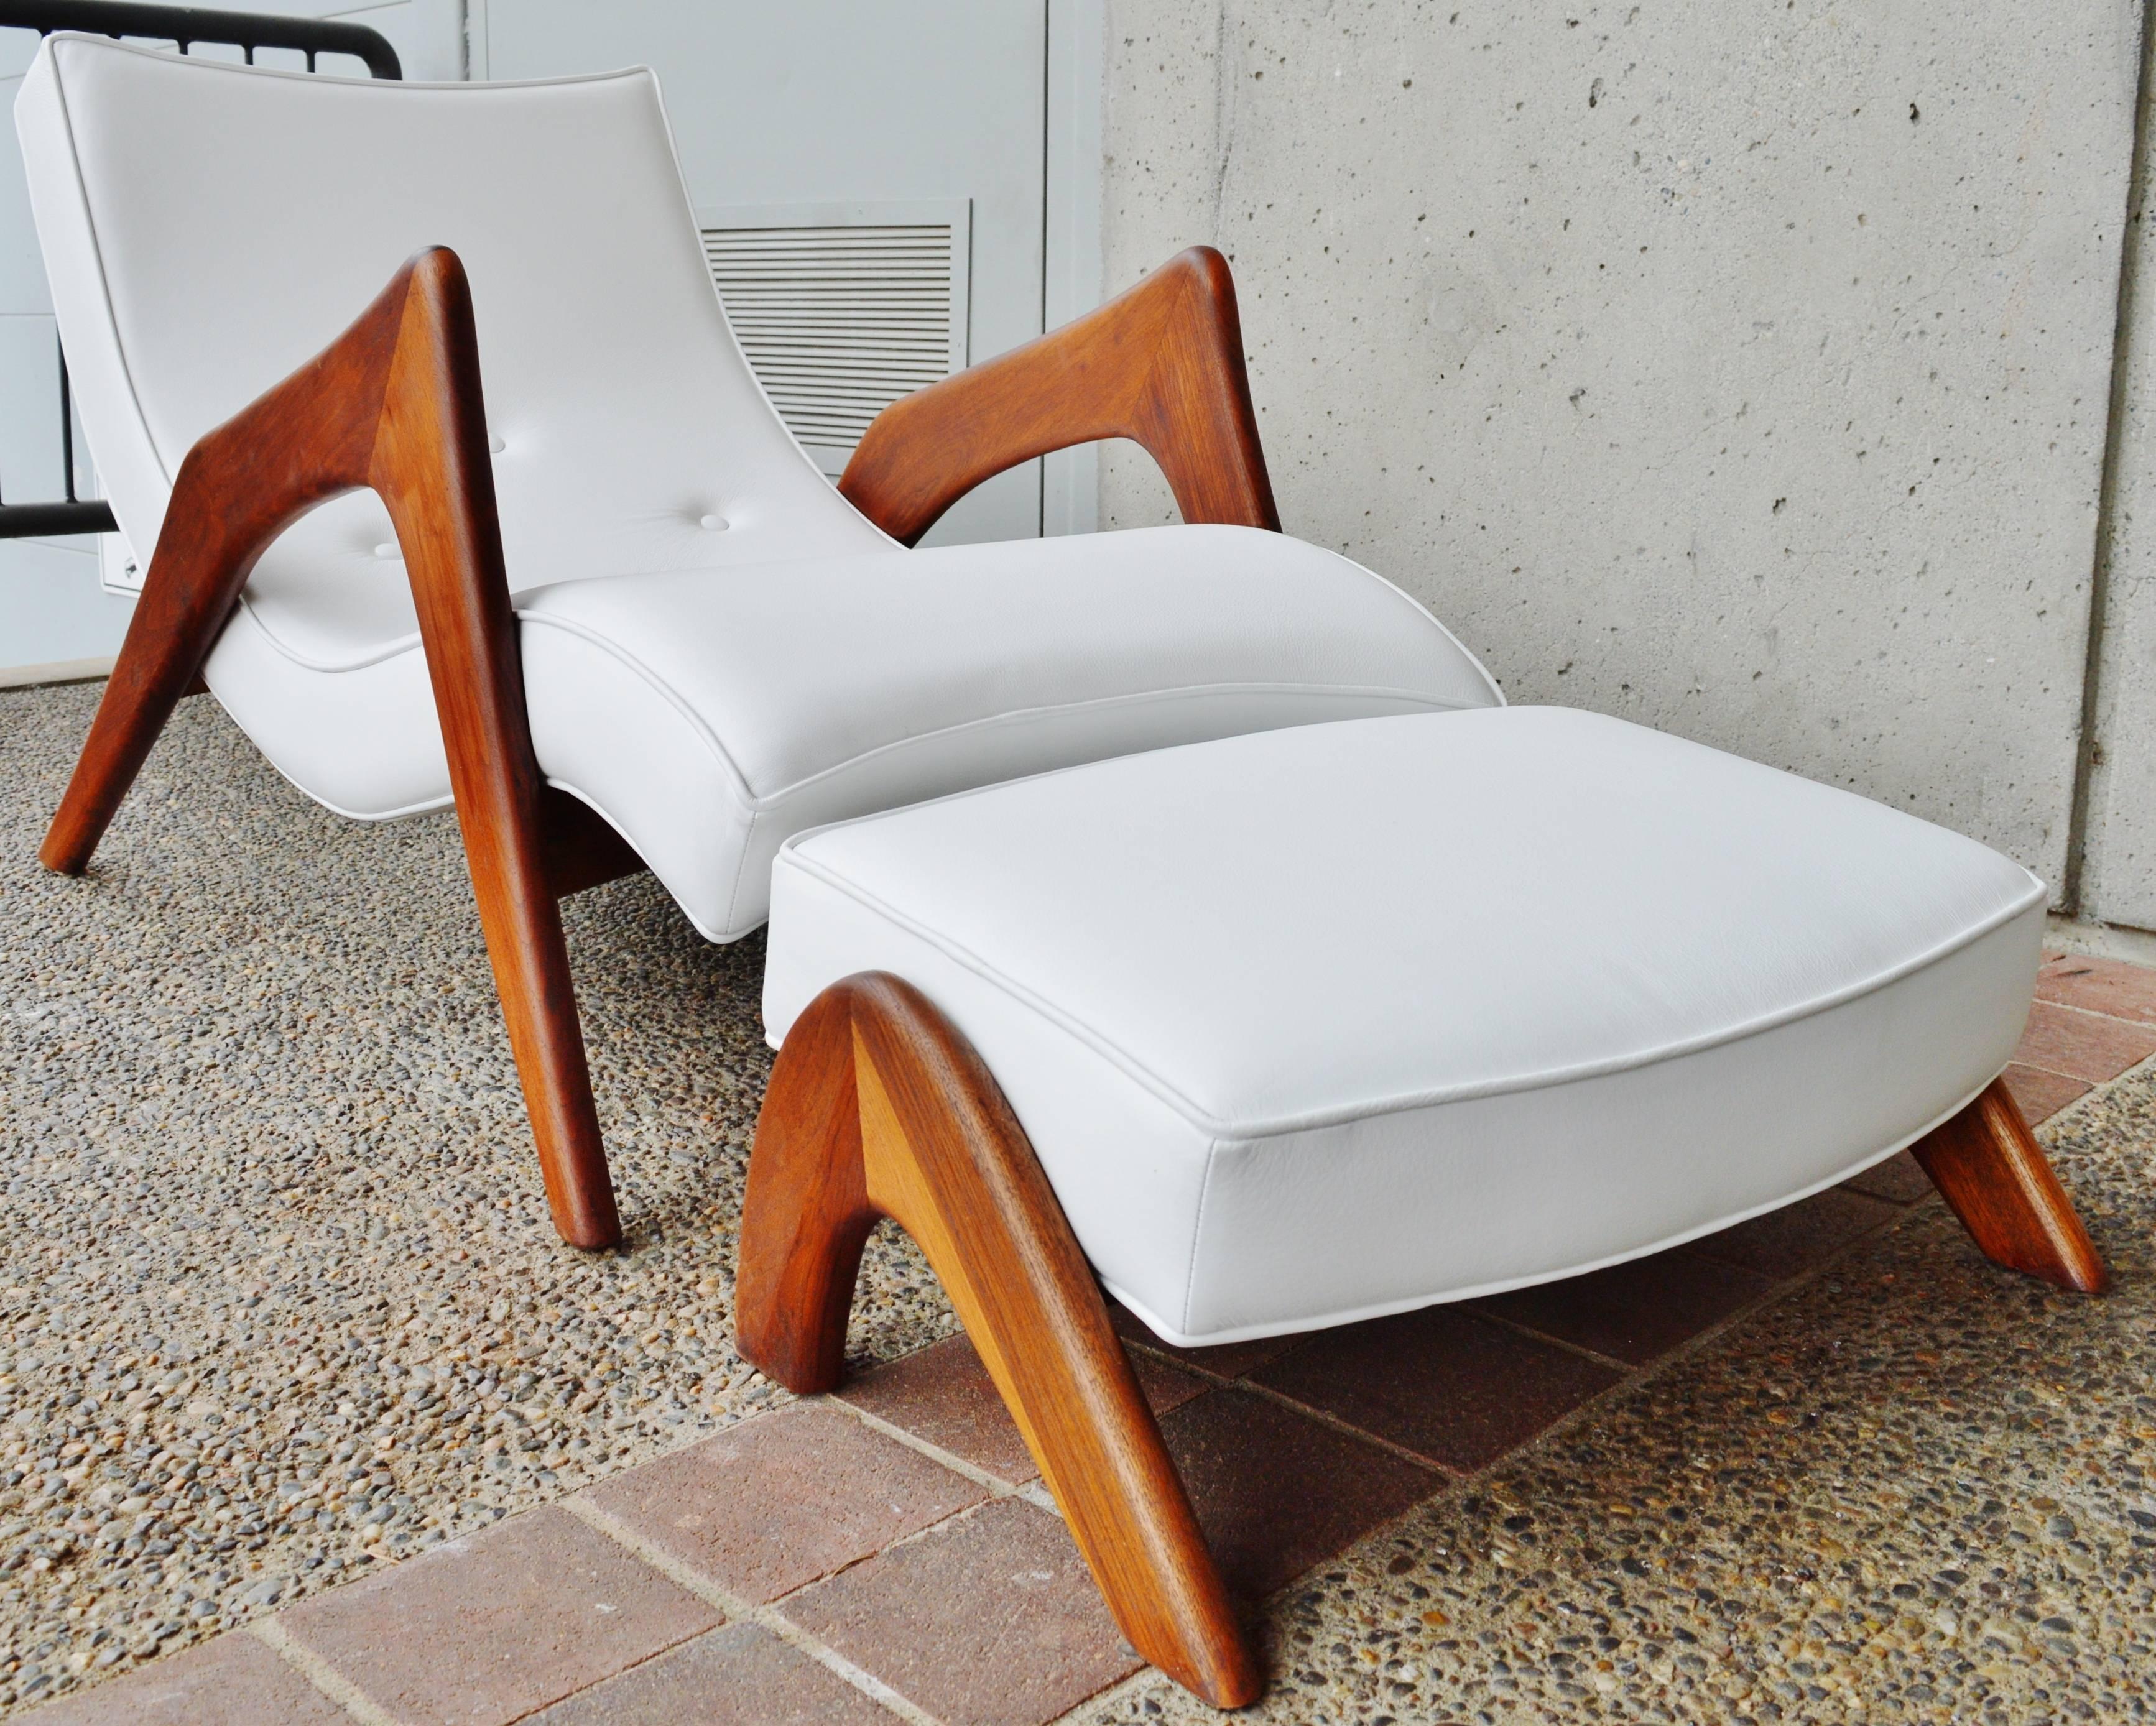 Rare Grasshopper Chaise and Ottoman, White Leather by Adrian Pearsall 1